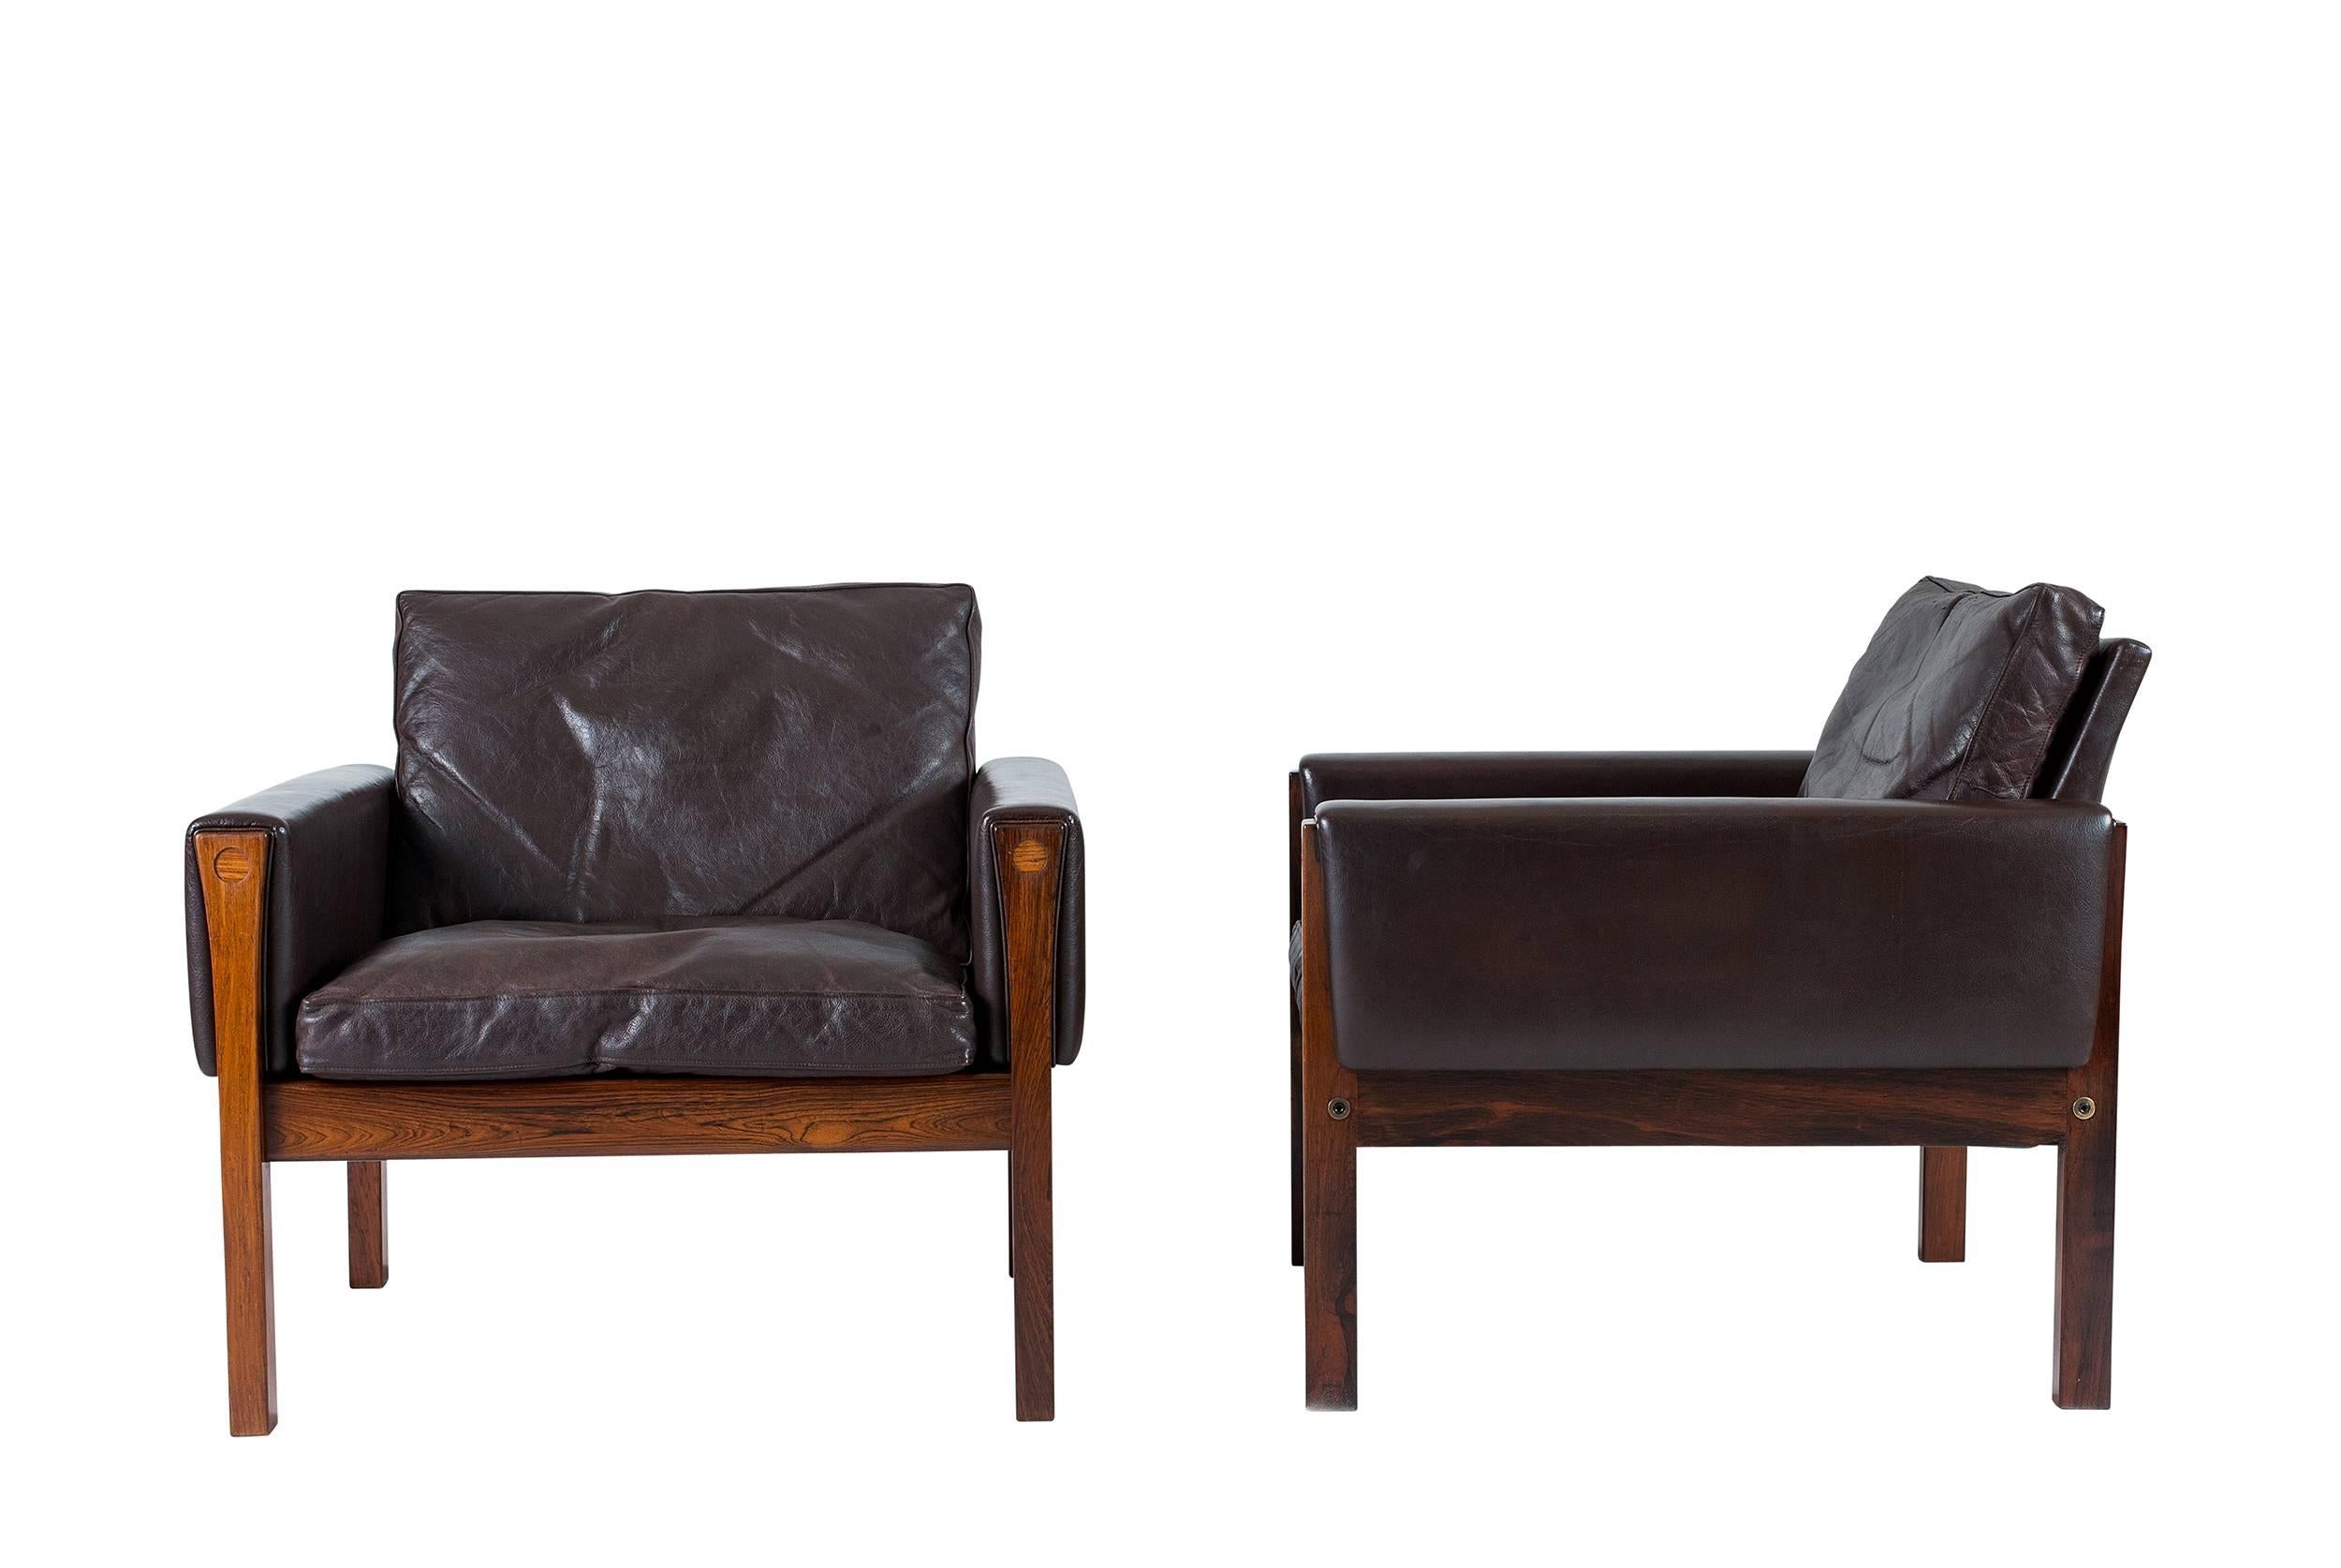 Pair of Hans Wegner AP 62 lounge chairs designed in 1960 and produced by A. P. Stolen.